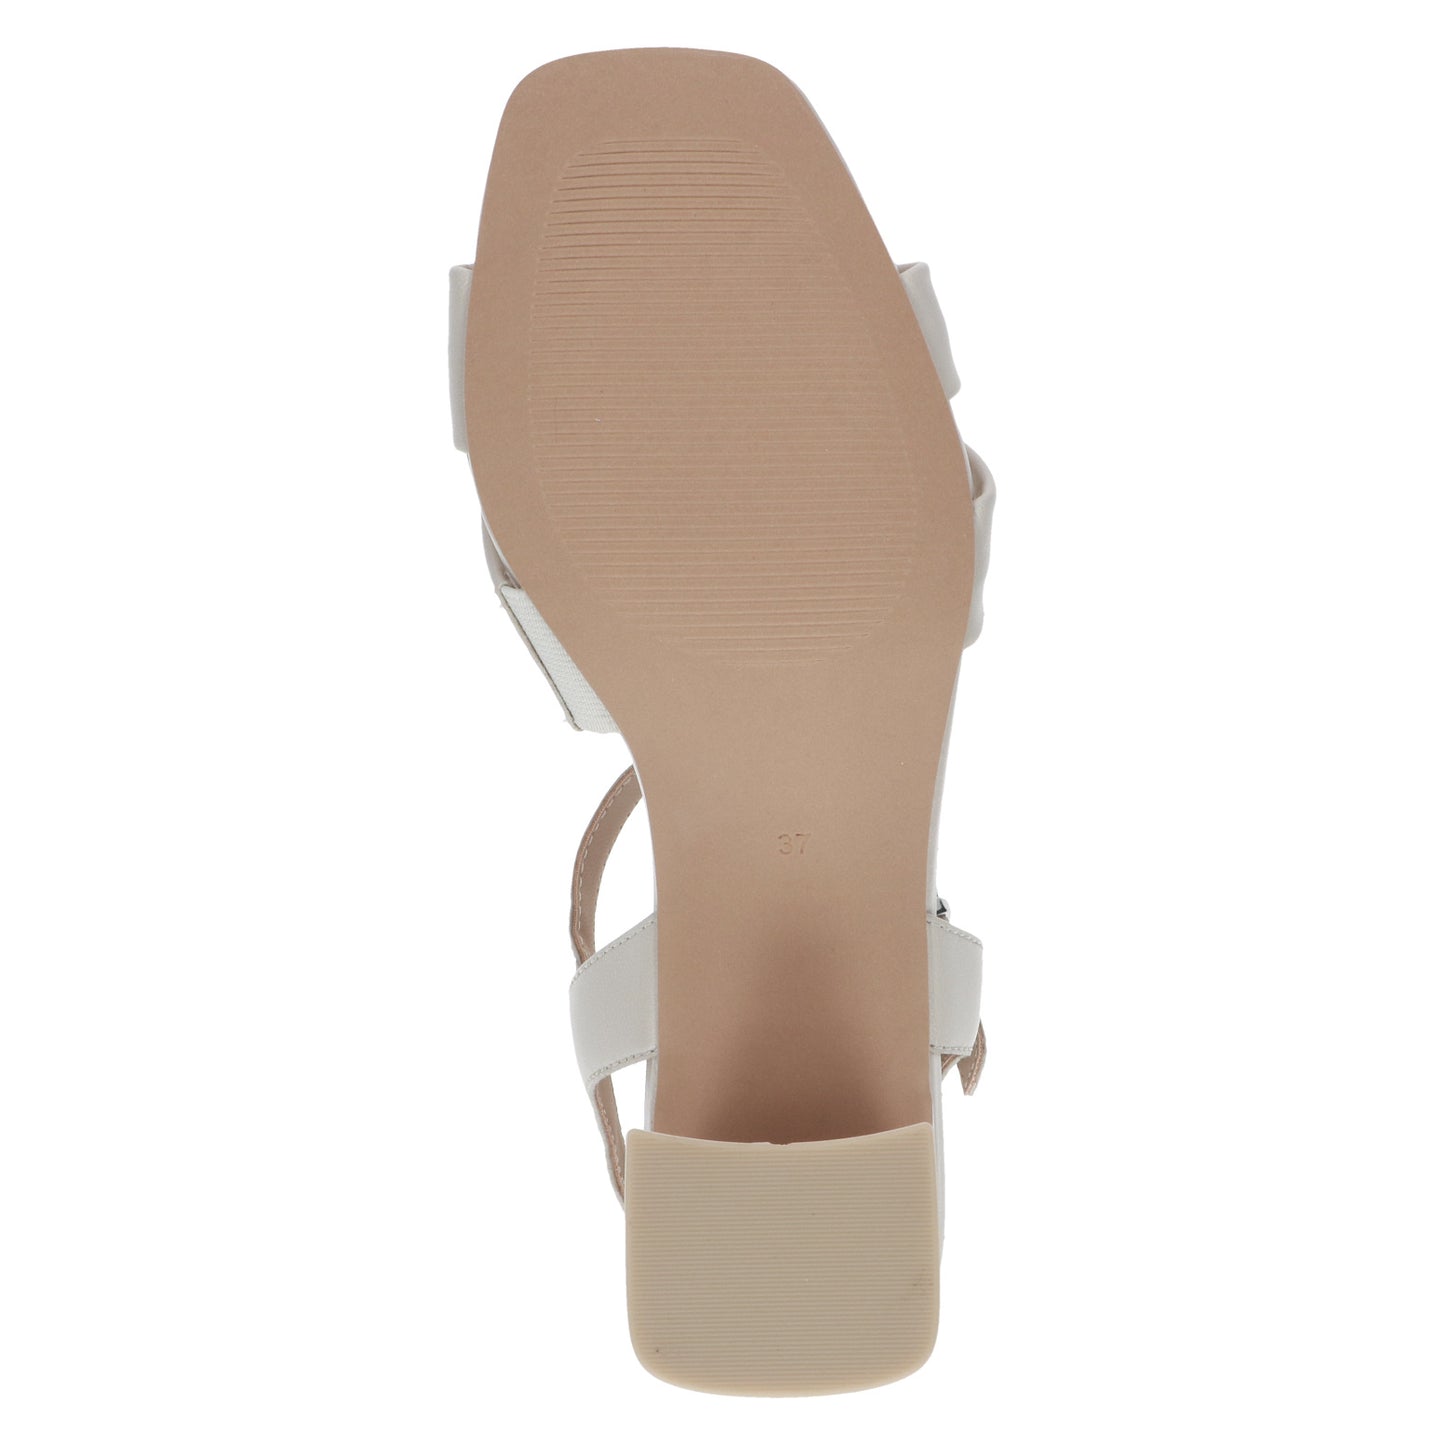 Caprice - Ladies Shoes Occasion Off White (2269)